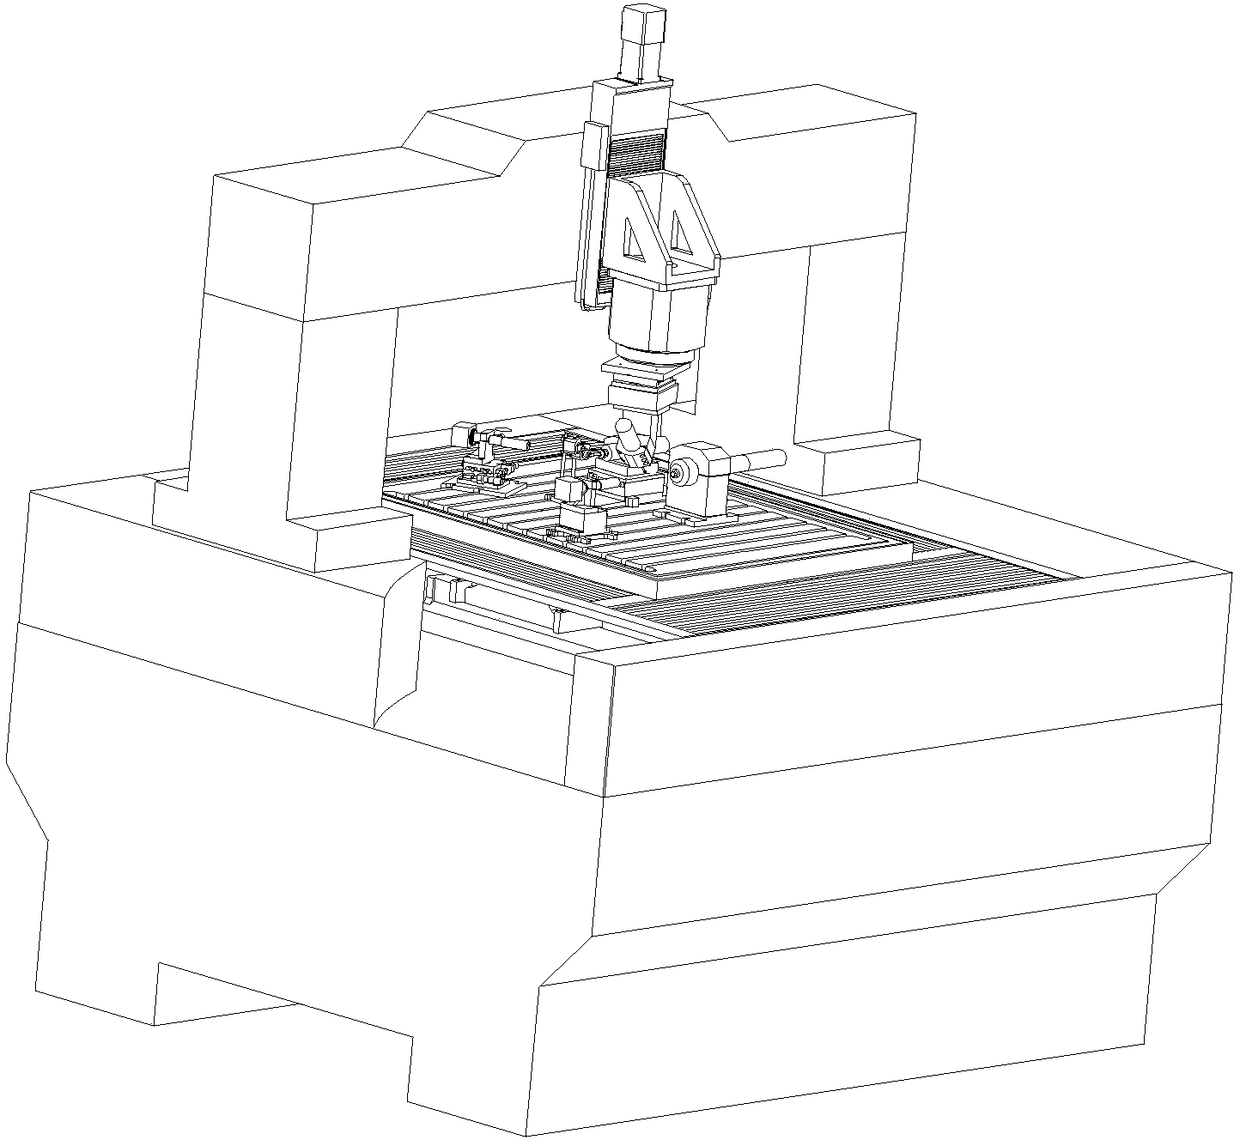 Machine tool for ultra-precision grinding of small-sized thin-walled complex structural parts